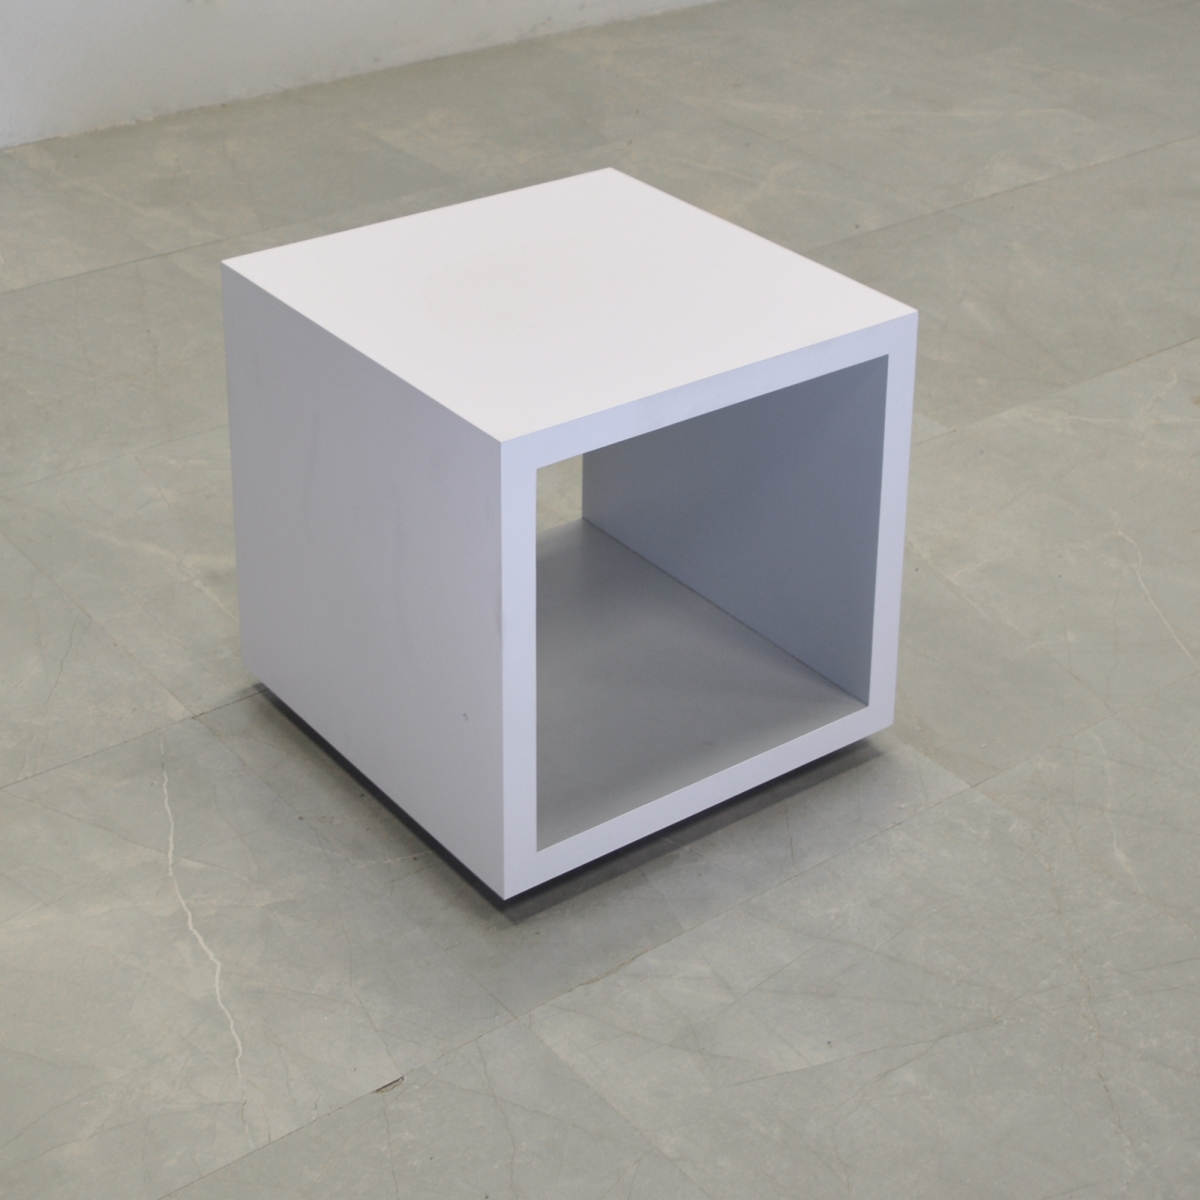 20 in. Axis Cubby Side Table - Stock # 1001-S